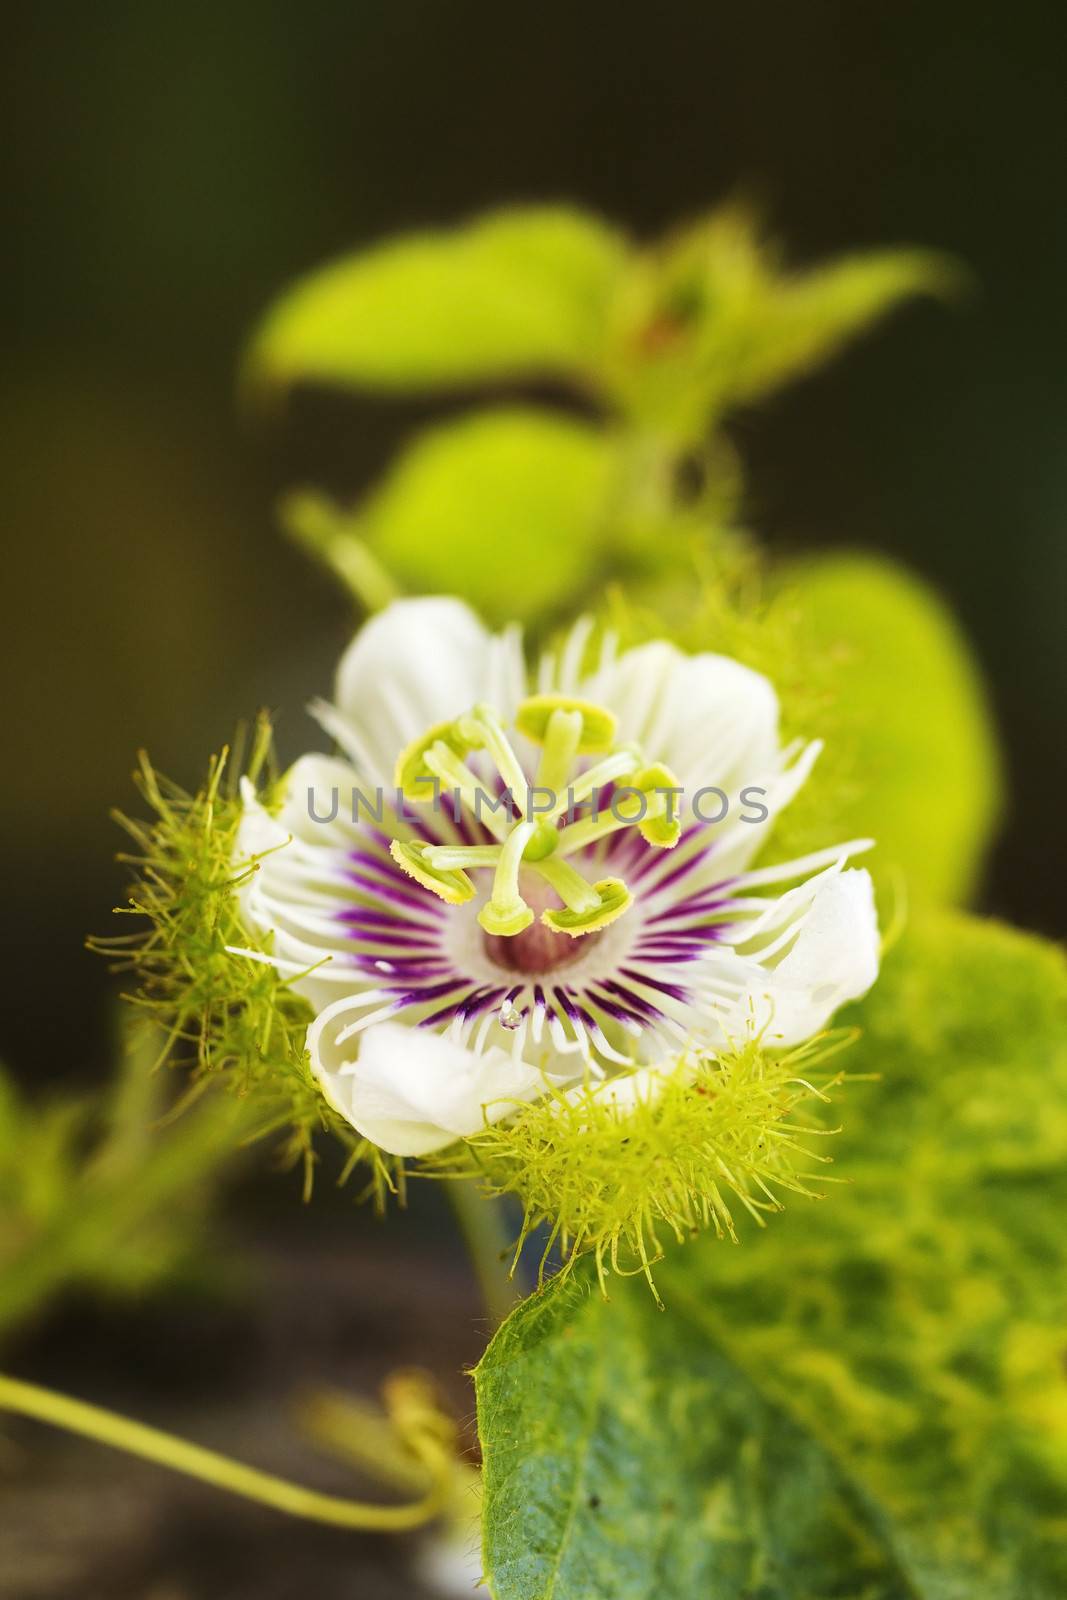 Soft-focused photograph of a tropical wild passionflower (Passiflora incarnata) growing wild in Thailand